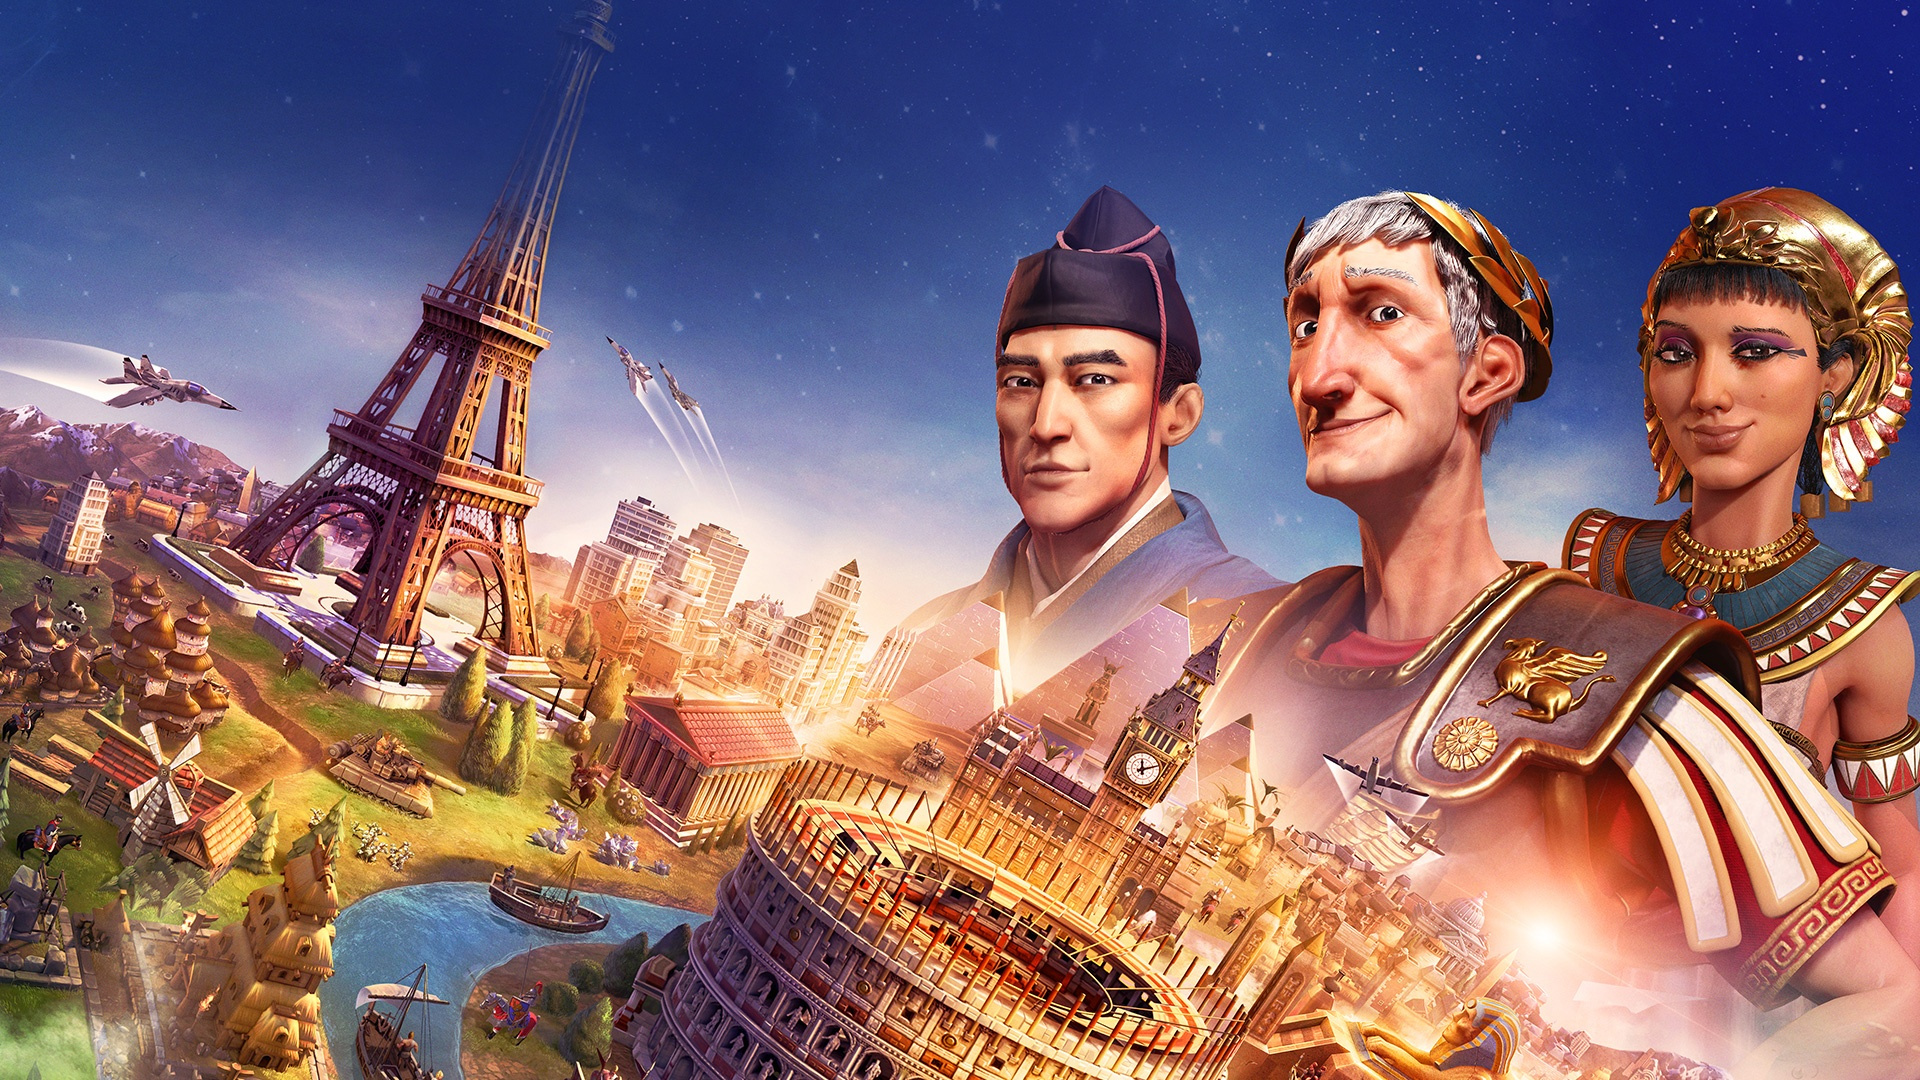 Civilization VI is conquering PS4 and Xbox One